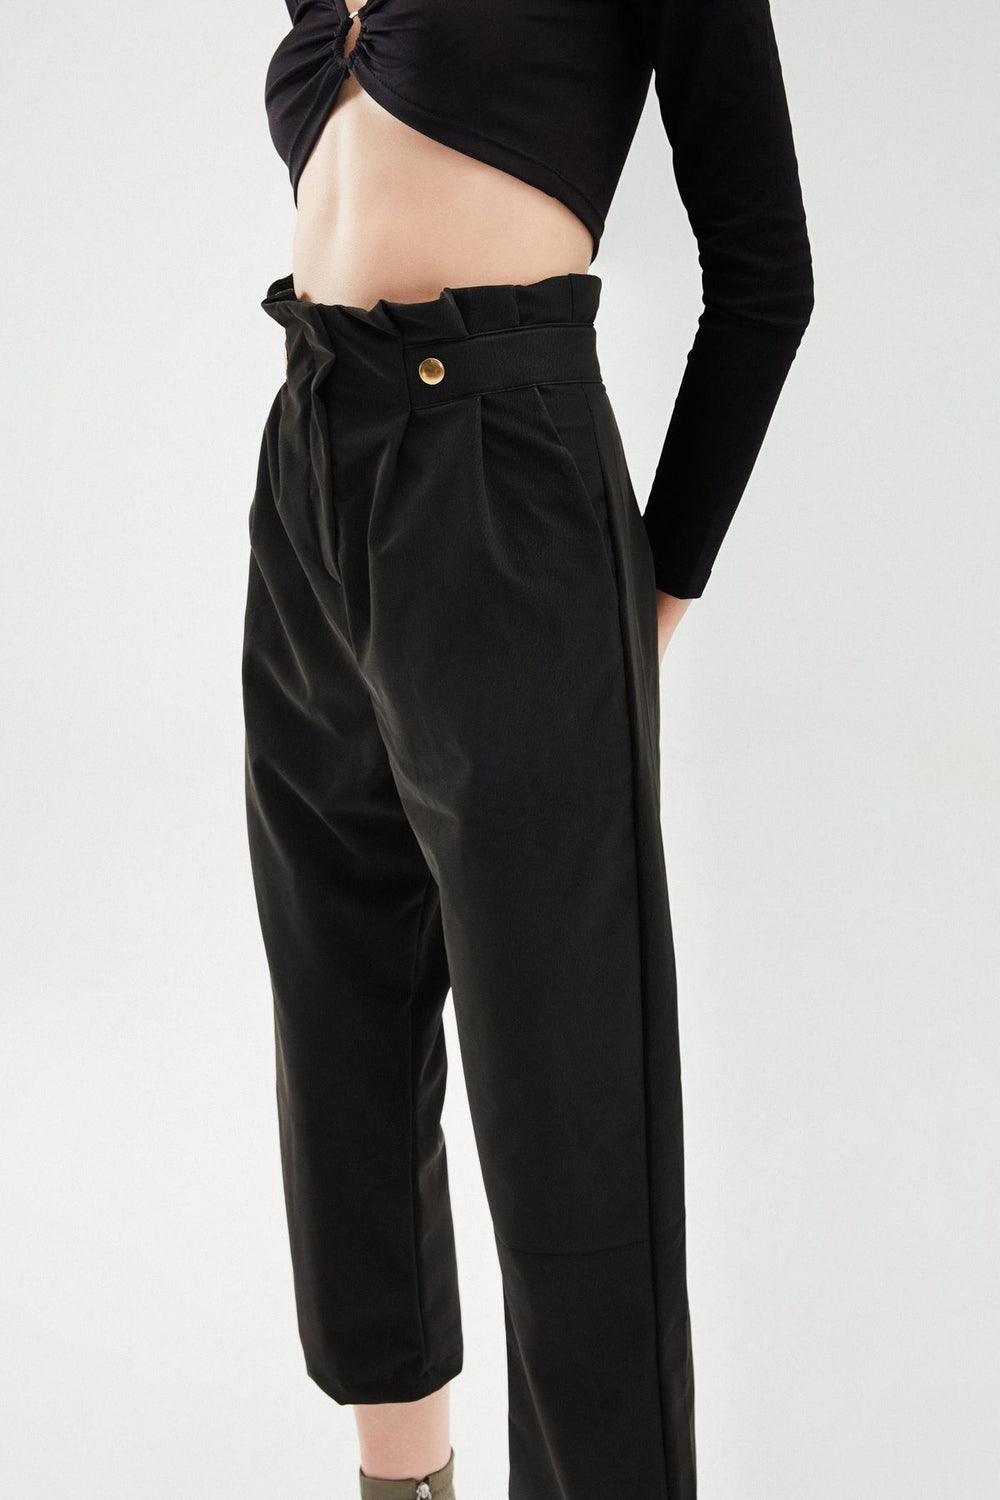 Buttoned Carrot Trousers Black